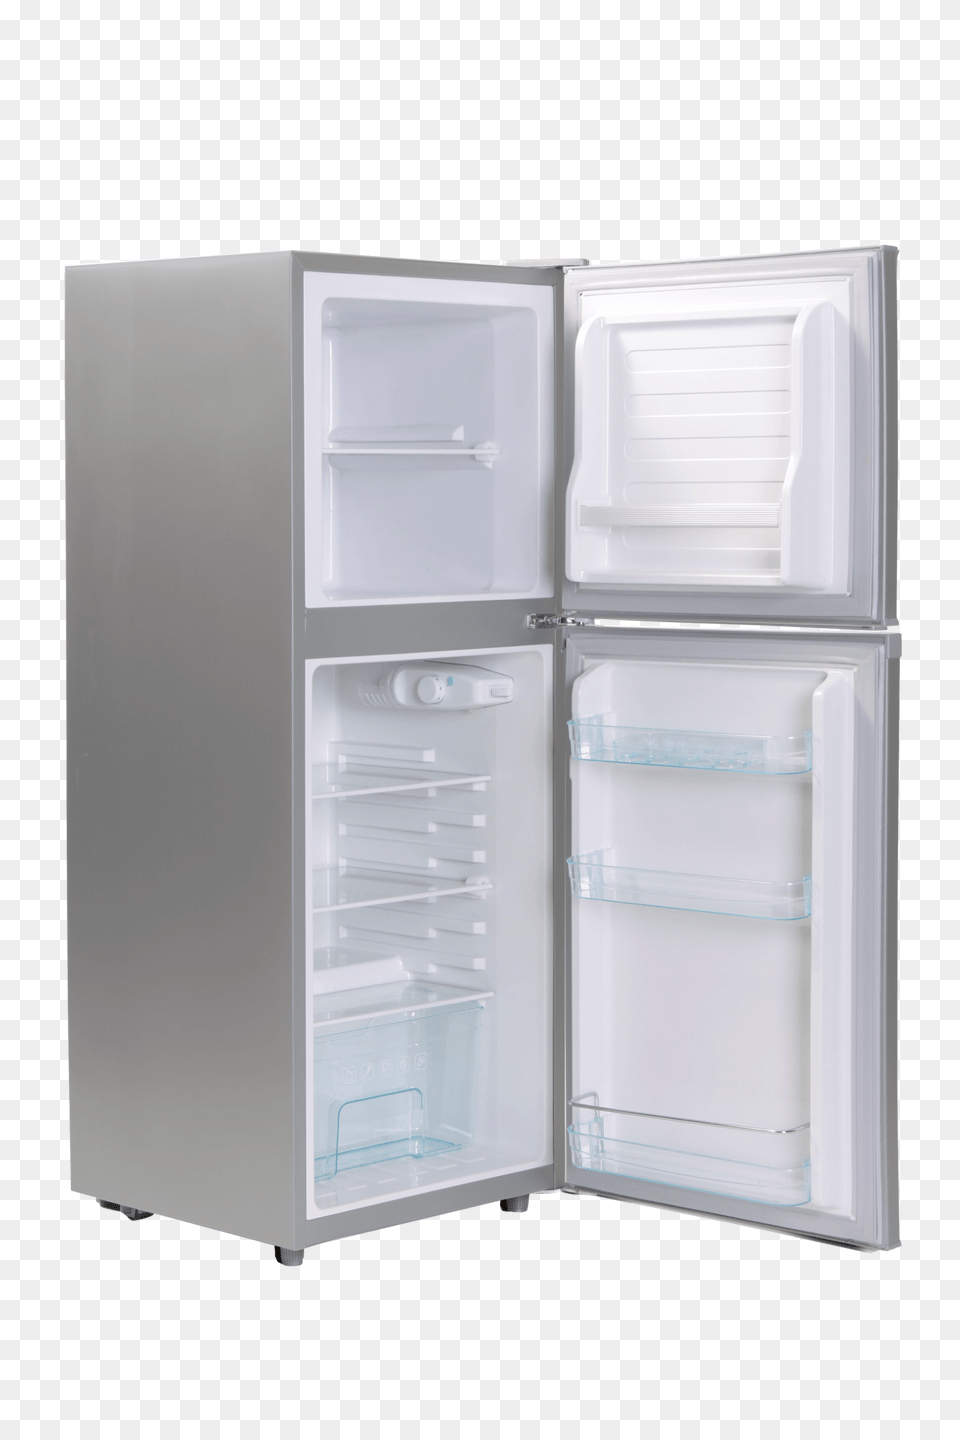 Open Fridge, Appliance, Device, Electrical Device, Refrigerator Png